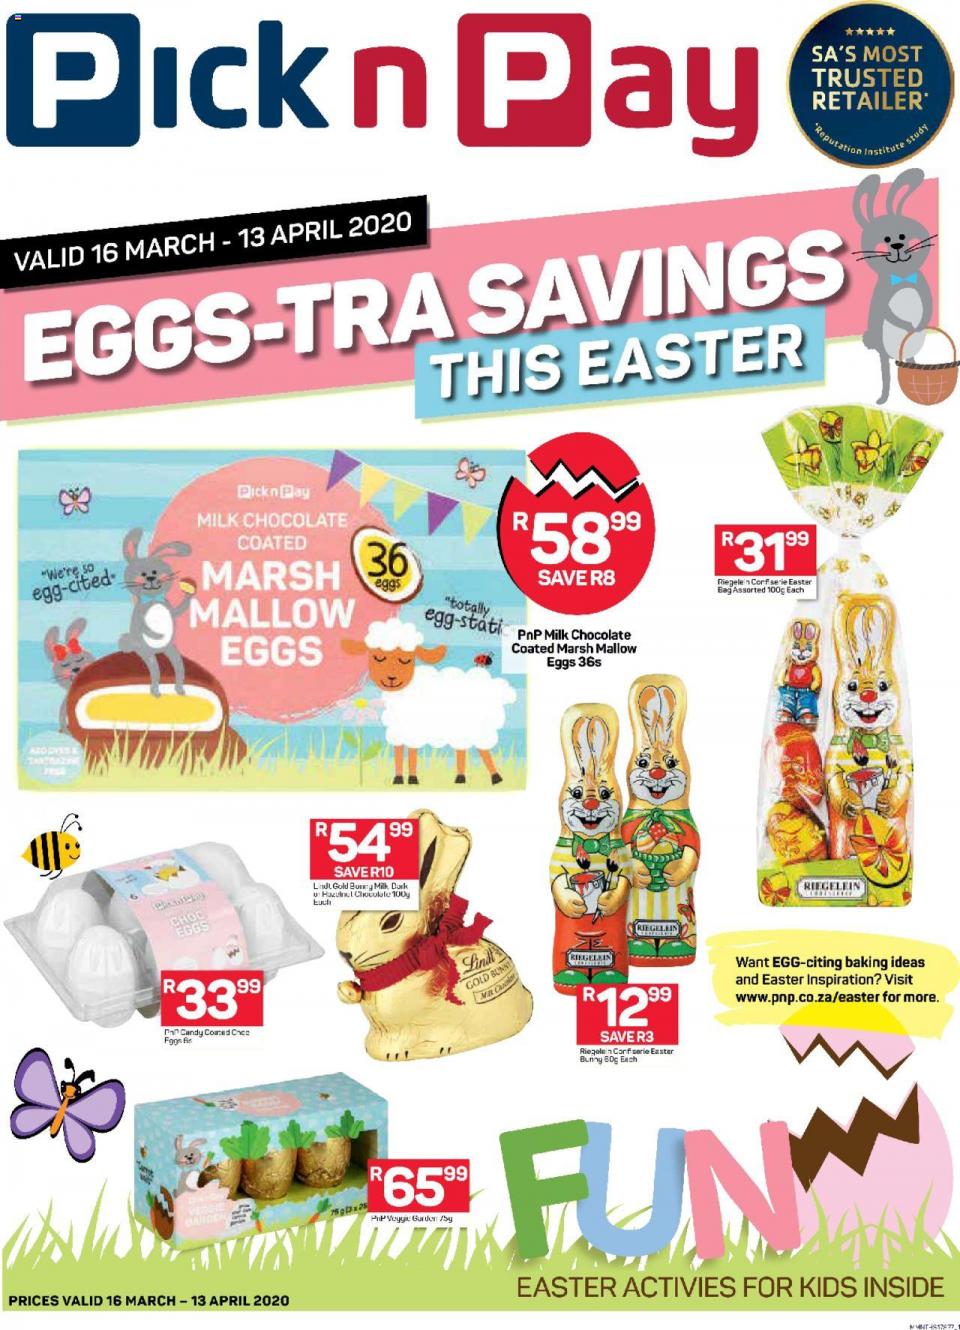 Pick n Pay Specials Eggs-tra Savings 16 March 2020